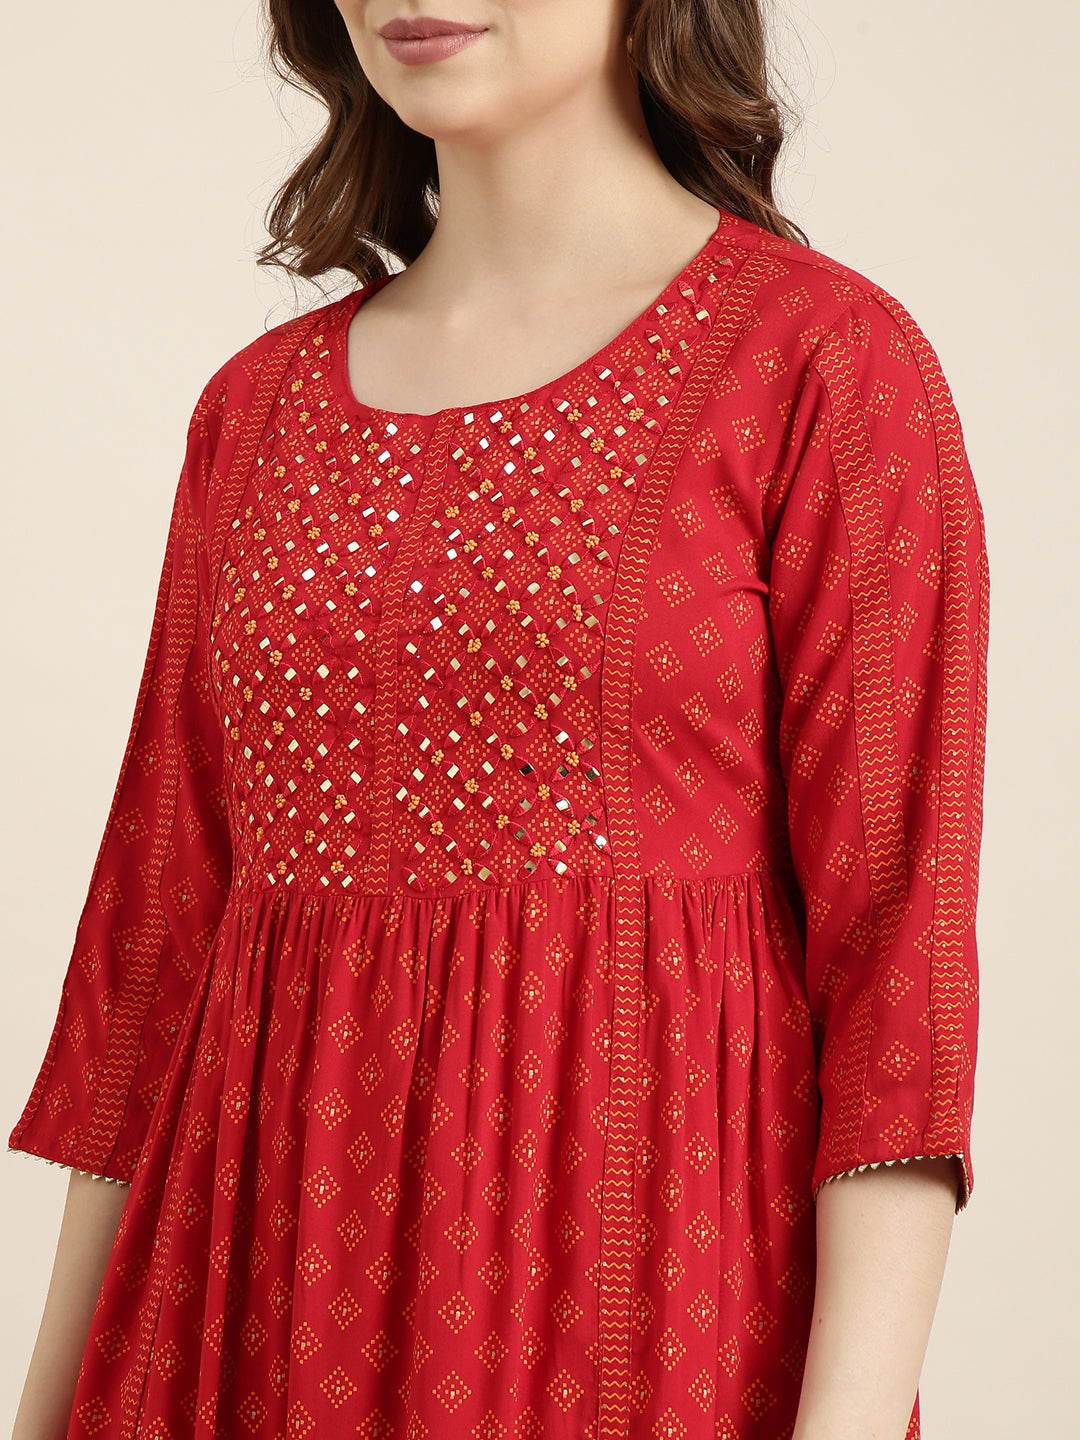 Women A-Line Red Geometric Kurta and Trousers Set Comes With Dupatta and Potli Bag